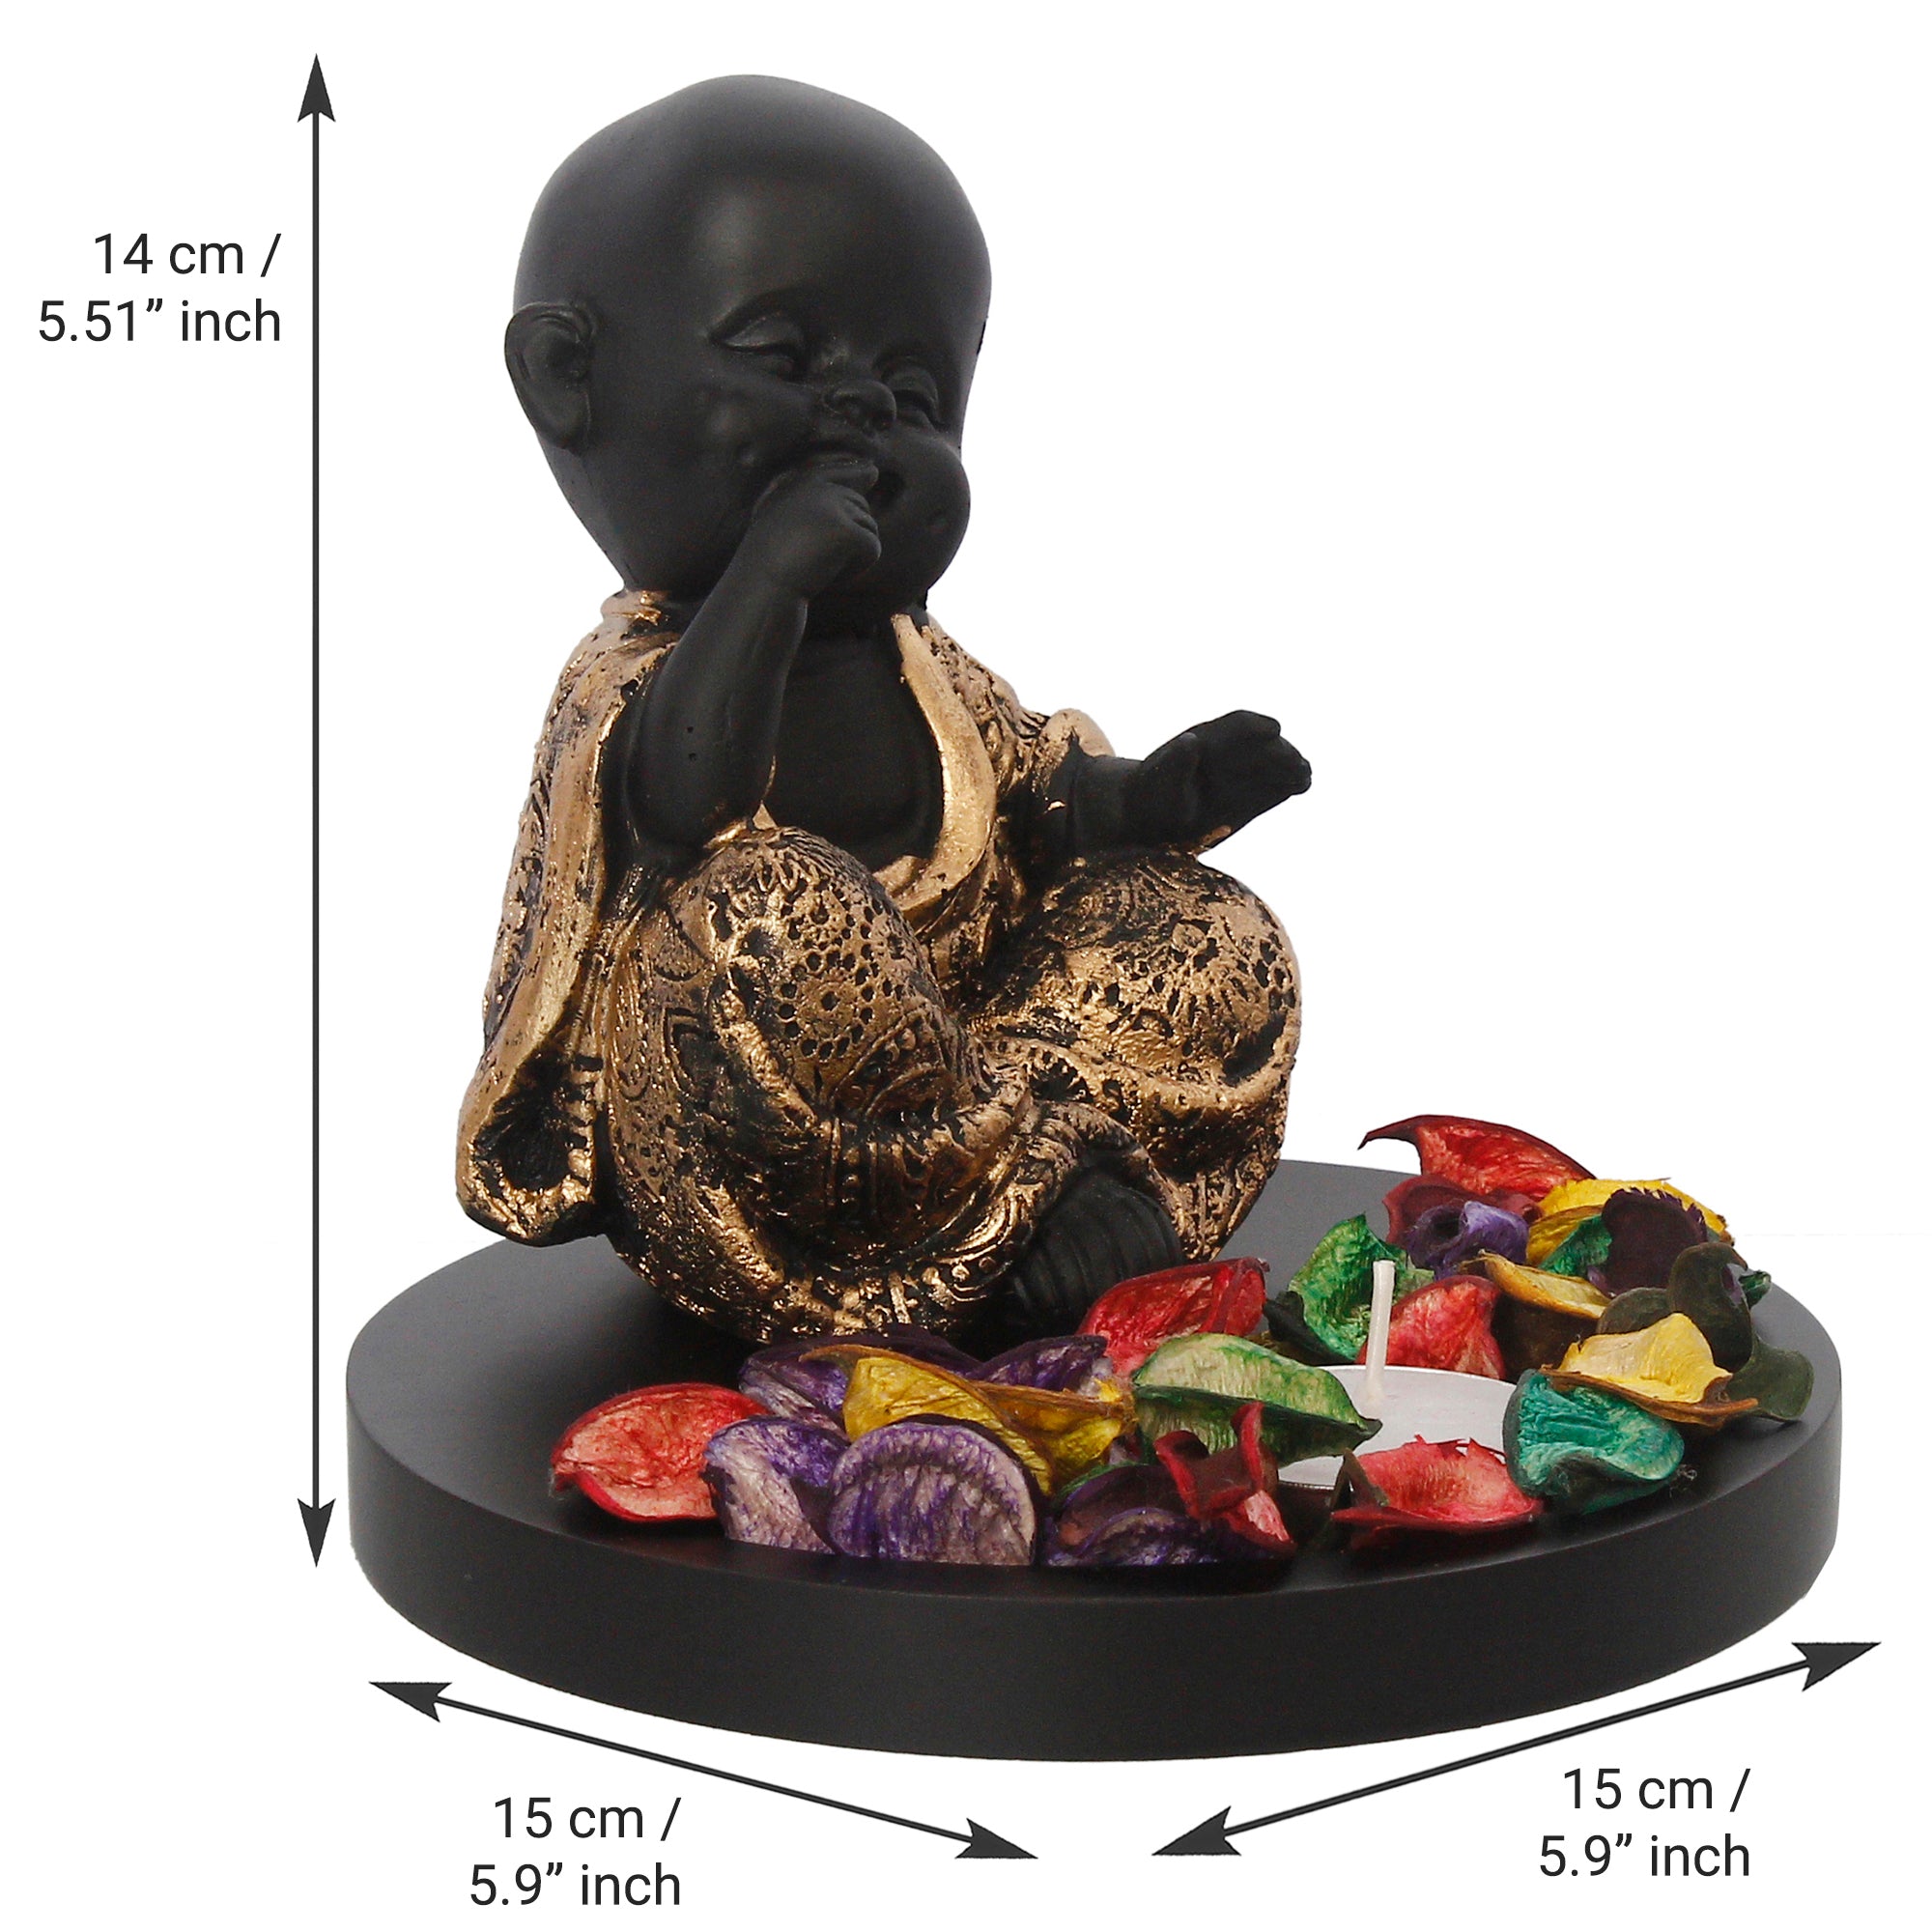 Decorative Smiling Golden Monk Buddha with Wooden Base, Fragranced Petals and Tealight 3